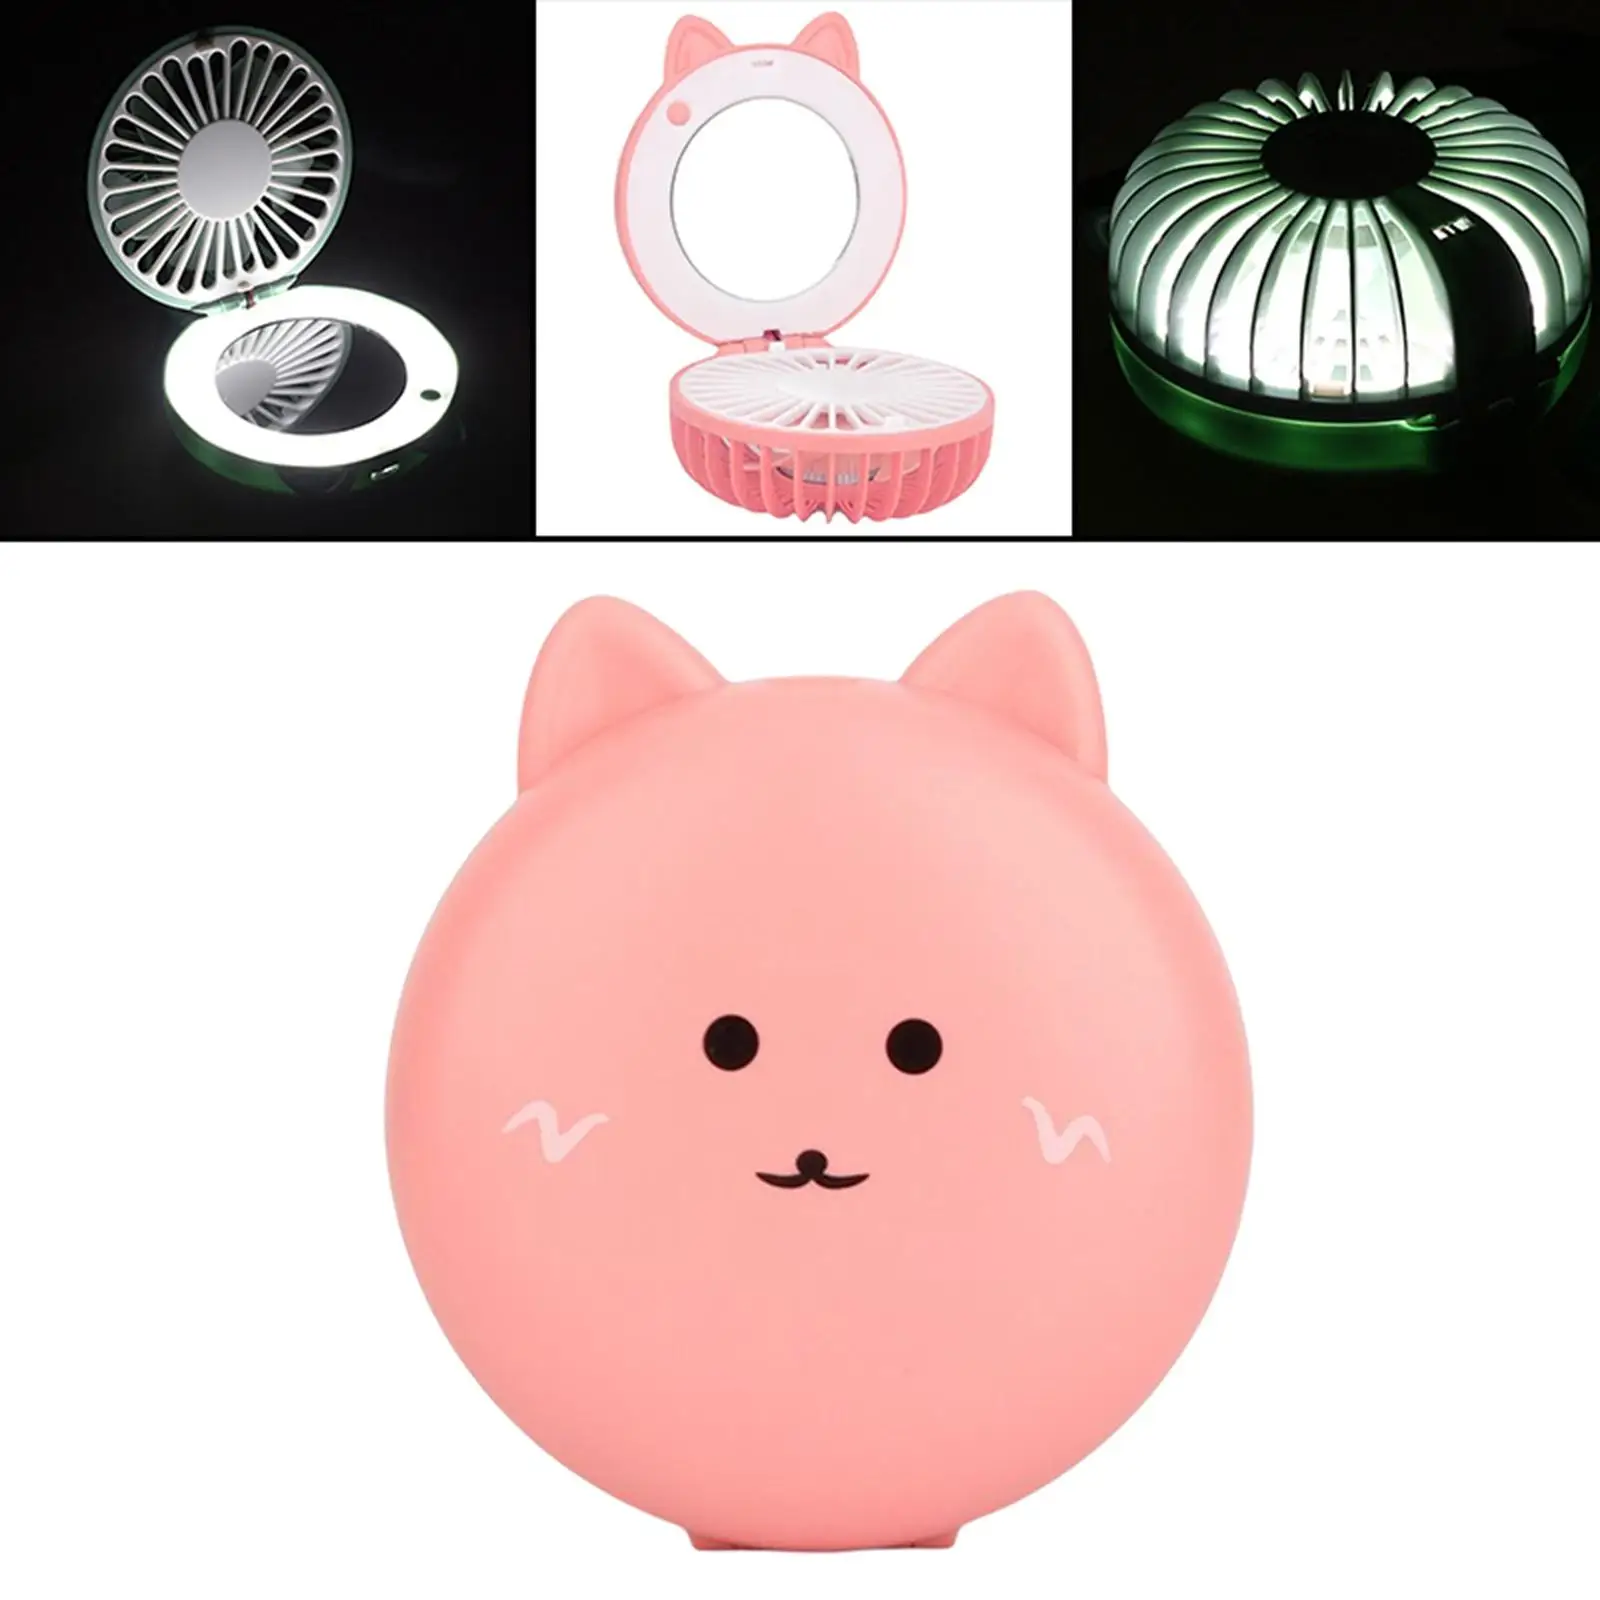 Mini Makeup Mirror with LED Light Gift for Women Fan for Indoor Travel